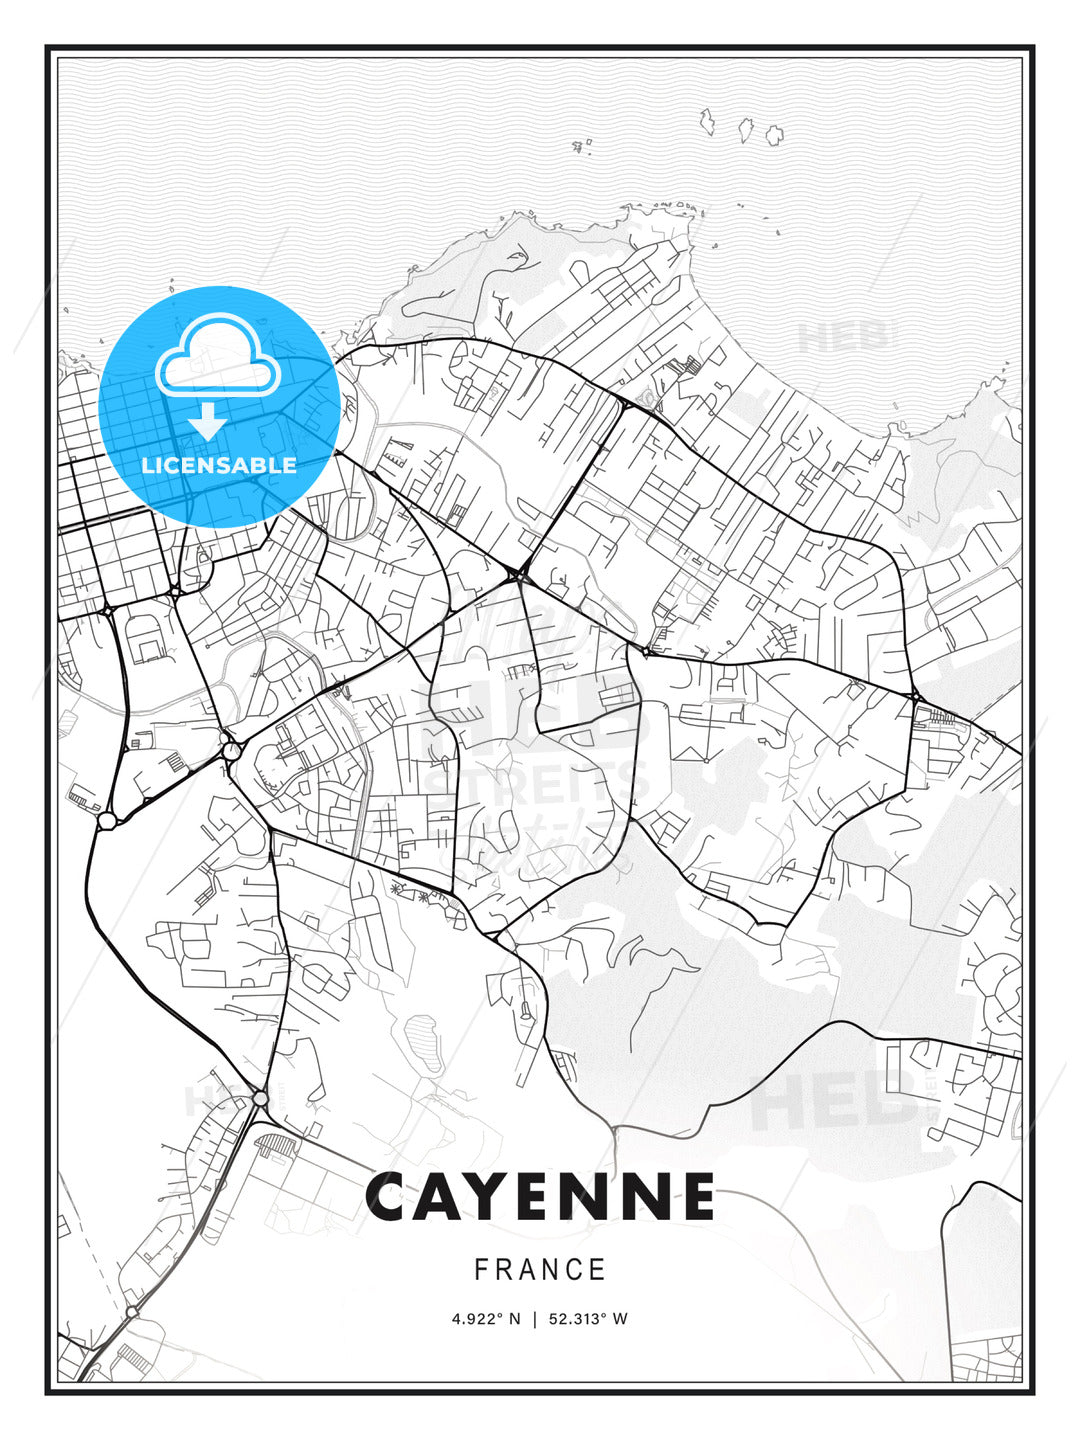 Cayenne, France, Modern Print Template in Various Formats - HEBSTREITS Sketches